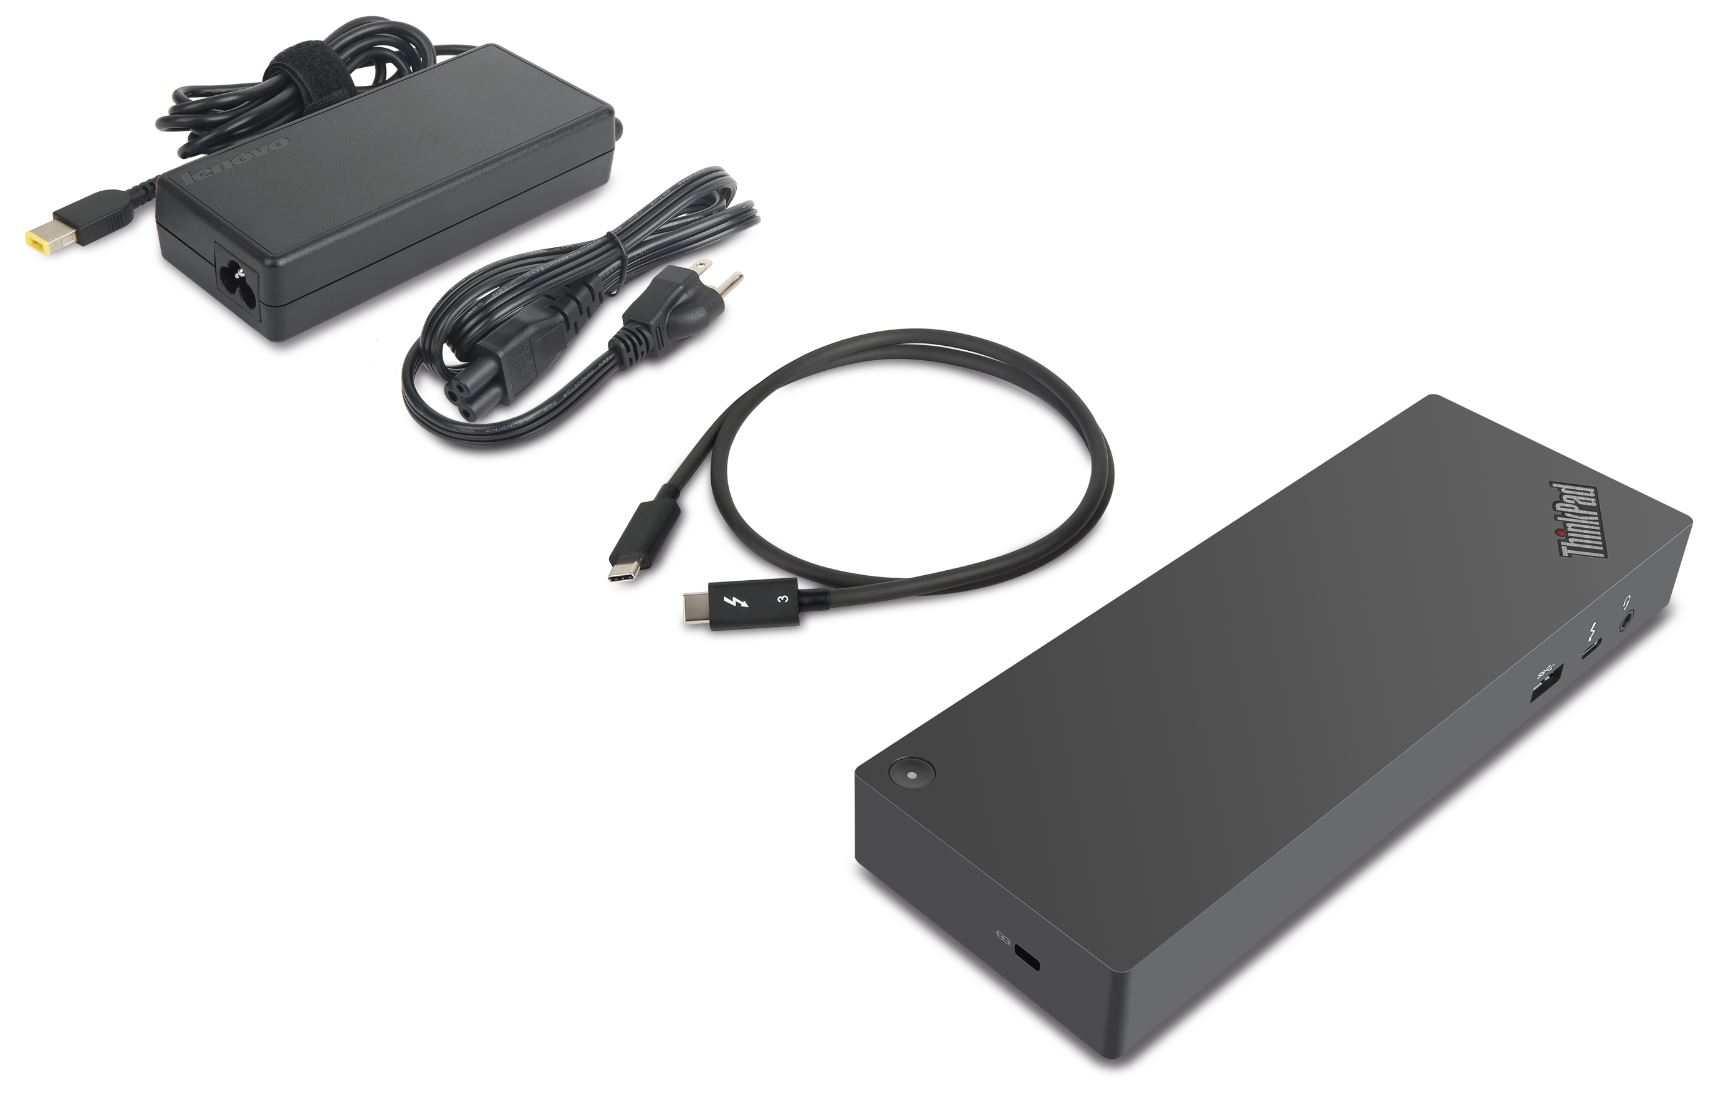 ThinkPad Thunderbolt 3 Dock Gen 2 Overview and Service Parts - Lenovo Support US